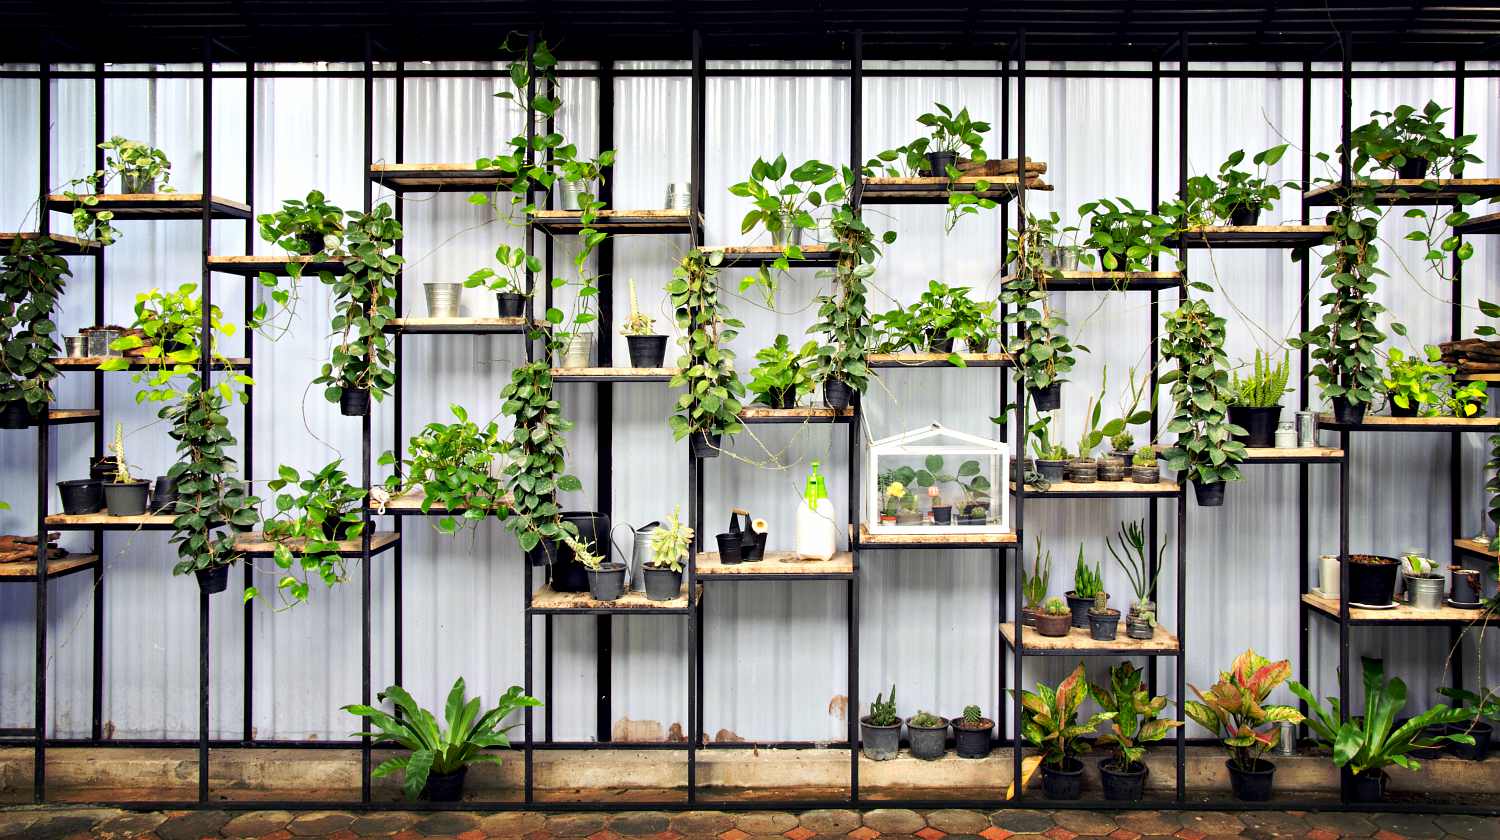 Feature | Shelf and box of tree plants decoration on wall | DIY Indoor Vertical Herb Garden